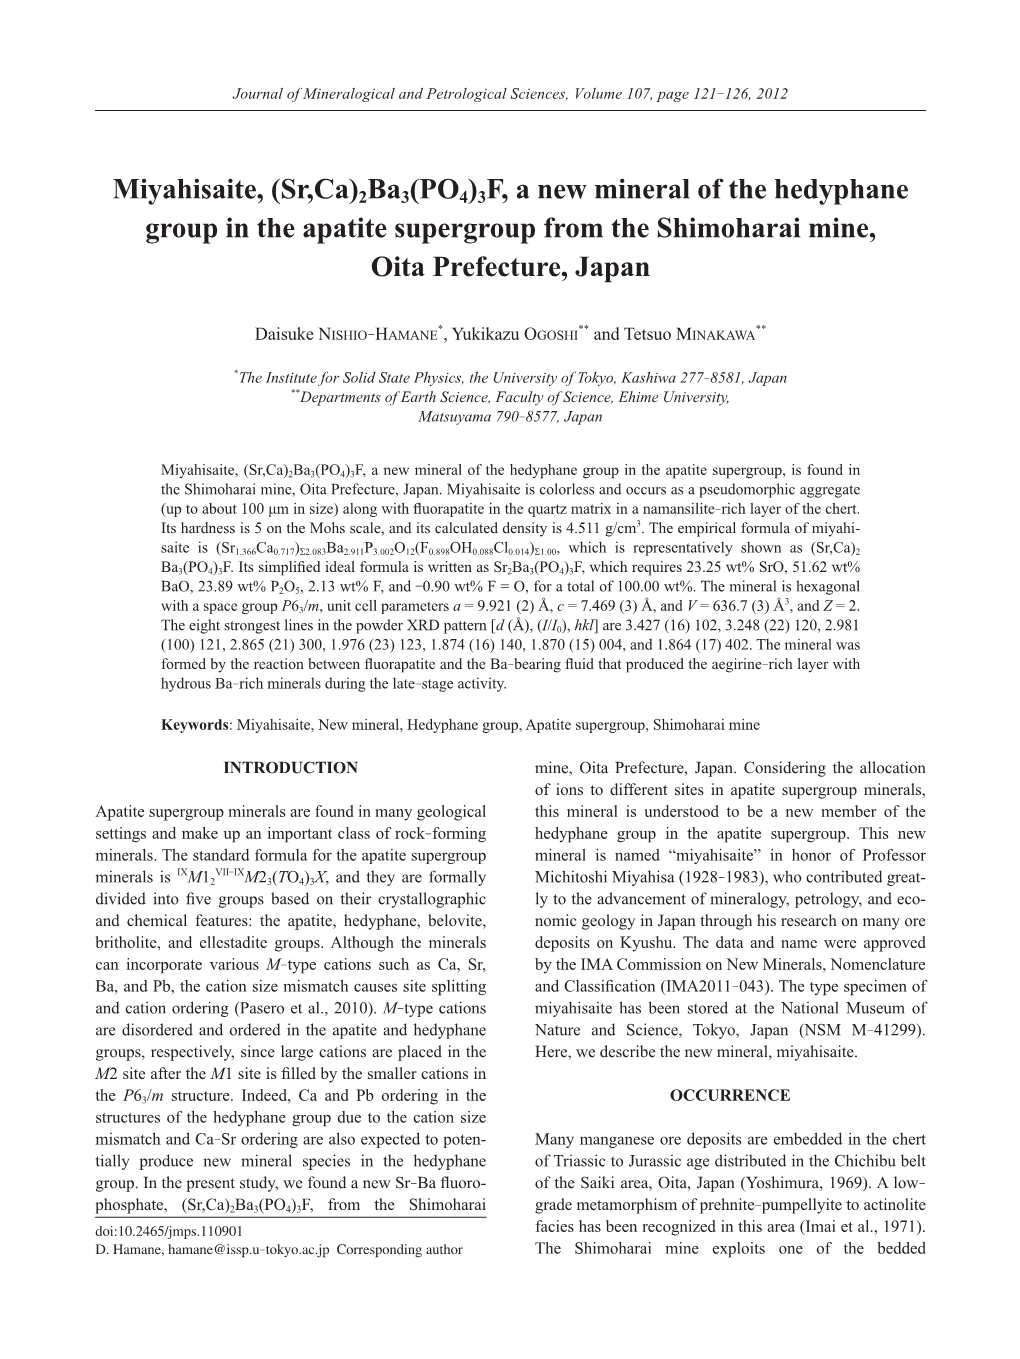 (Sr,Ca)2Ba3(PO4)3F, a New Mineral of the Hedyphane Group in the Apatite Supergroup from the Shimoharai Mine, Oita Prefecture, Japan